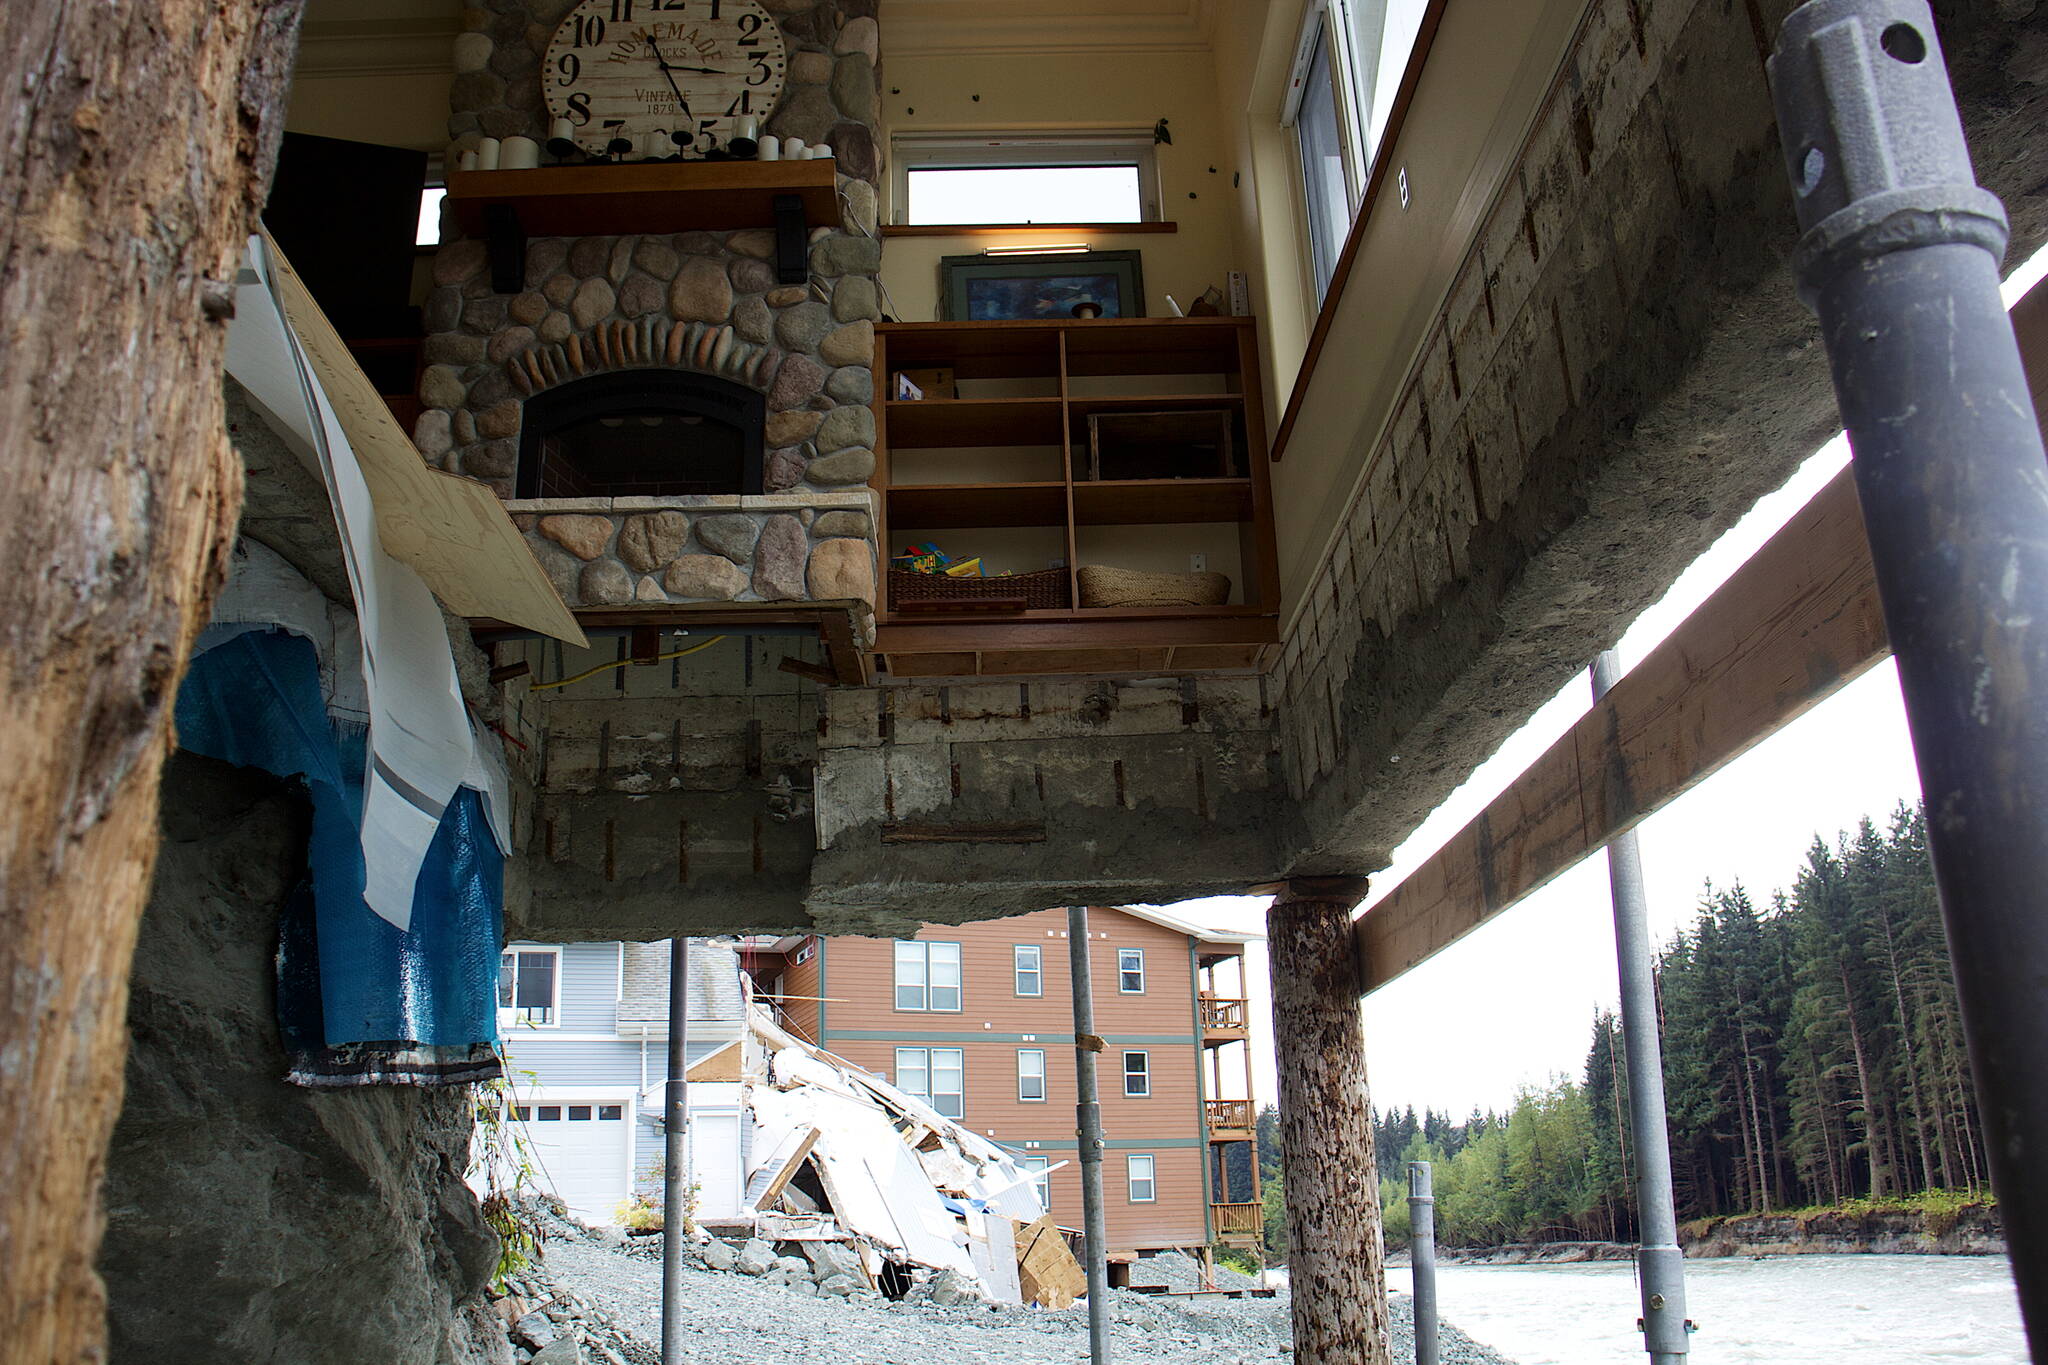 The living room of Marty and Marjorie McKeown’s house remains exposed a month after record flooding of the Mendenhall River eroded the couple’s backyard and portions of the earth under their home. In the backdrop next door are the remains of a home that mostly collapsed into the river during the flood and a condominium that is being propped up with posts and rock fill in an attempt to make it safe to occupy again. (Mark Sabbatini / Juneau Empire)